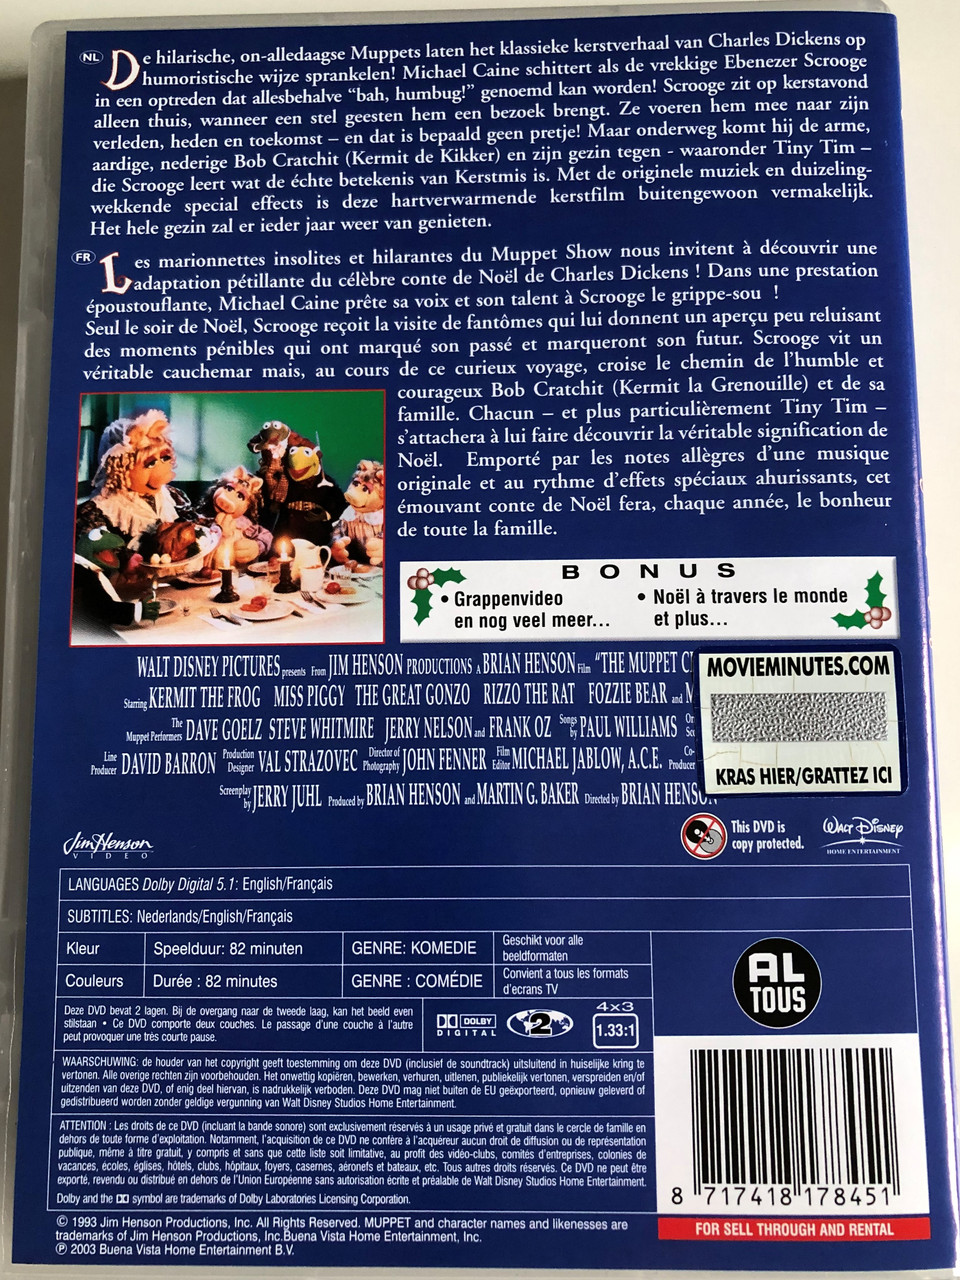 The Muppet Christmas Carol DVD 1992 Noel Chez Les Muppets / Directed by  Brian Henson / Starring: Kermit the Frog, Miss Piggy, The Great Gonzo,  Rizzo the Rat, Fozzie Bear, Michael Caine - bibleinmylanguage